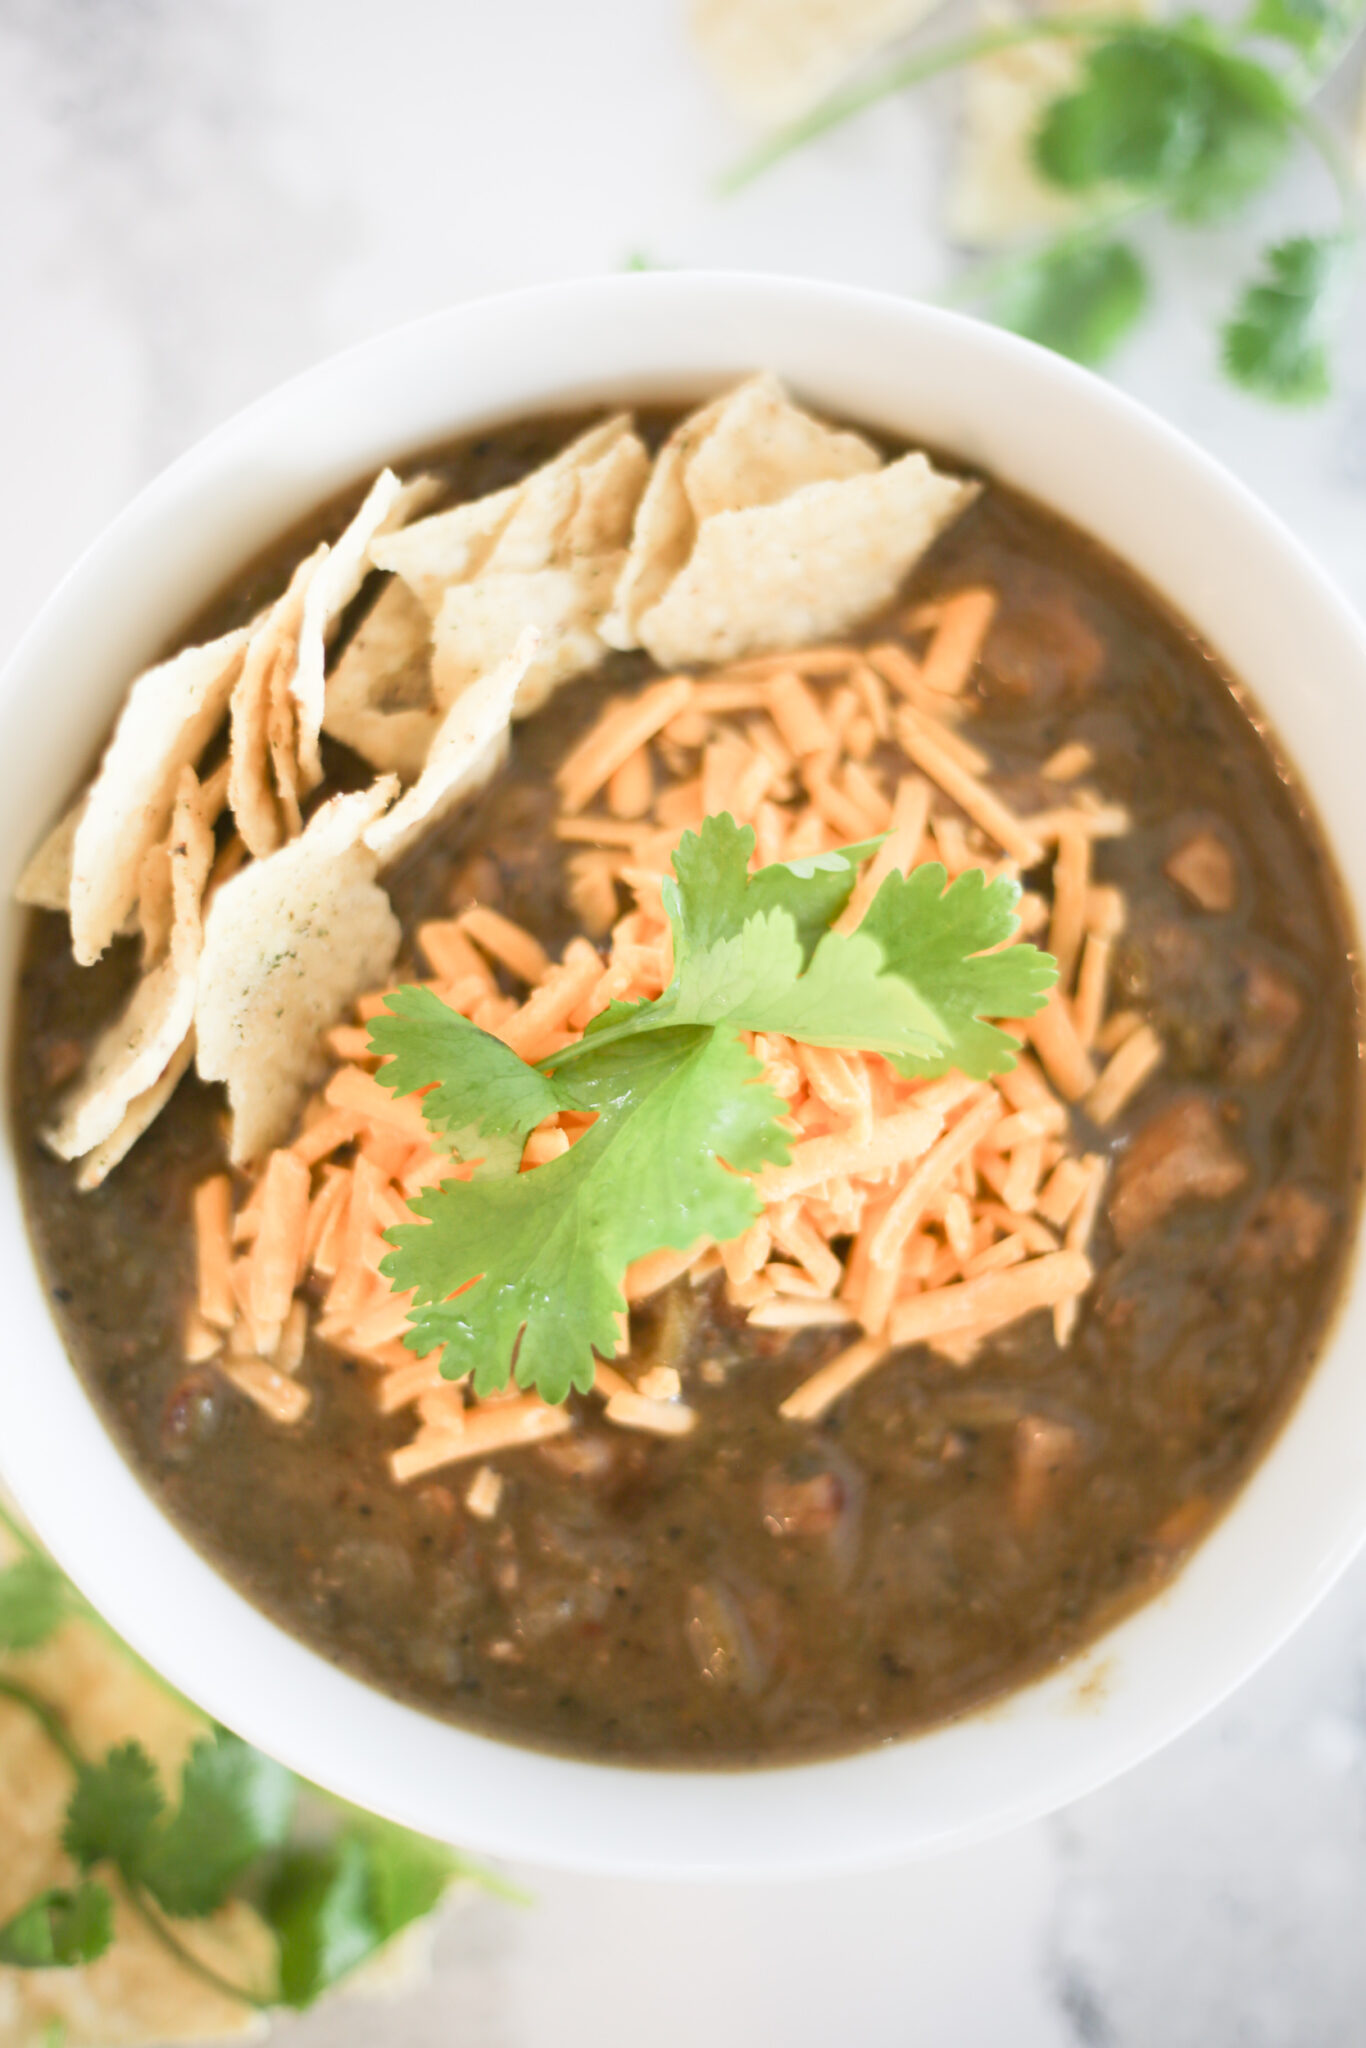 Out Of This World Pork Green Chili Recipe - The Unlikely Hostess